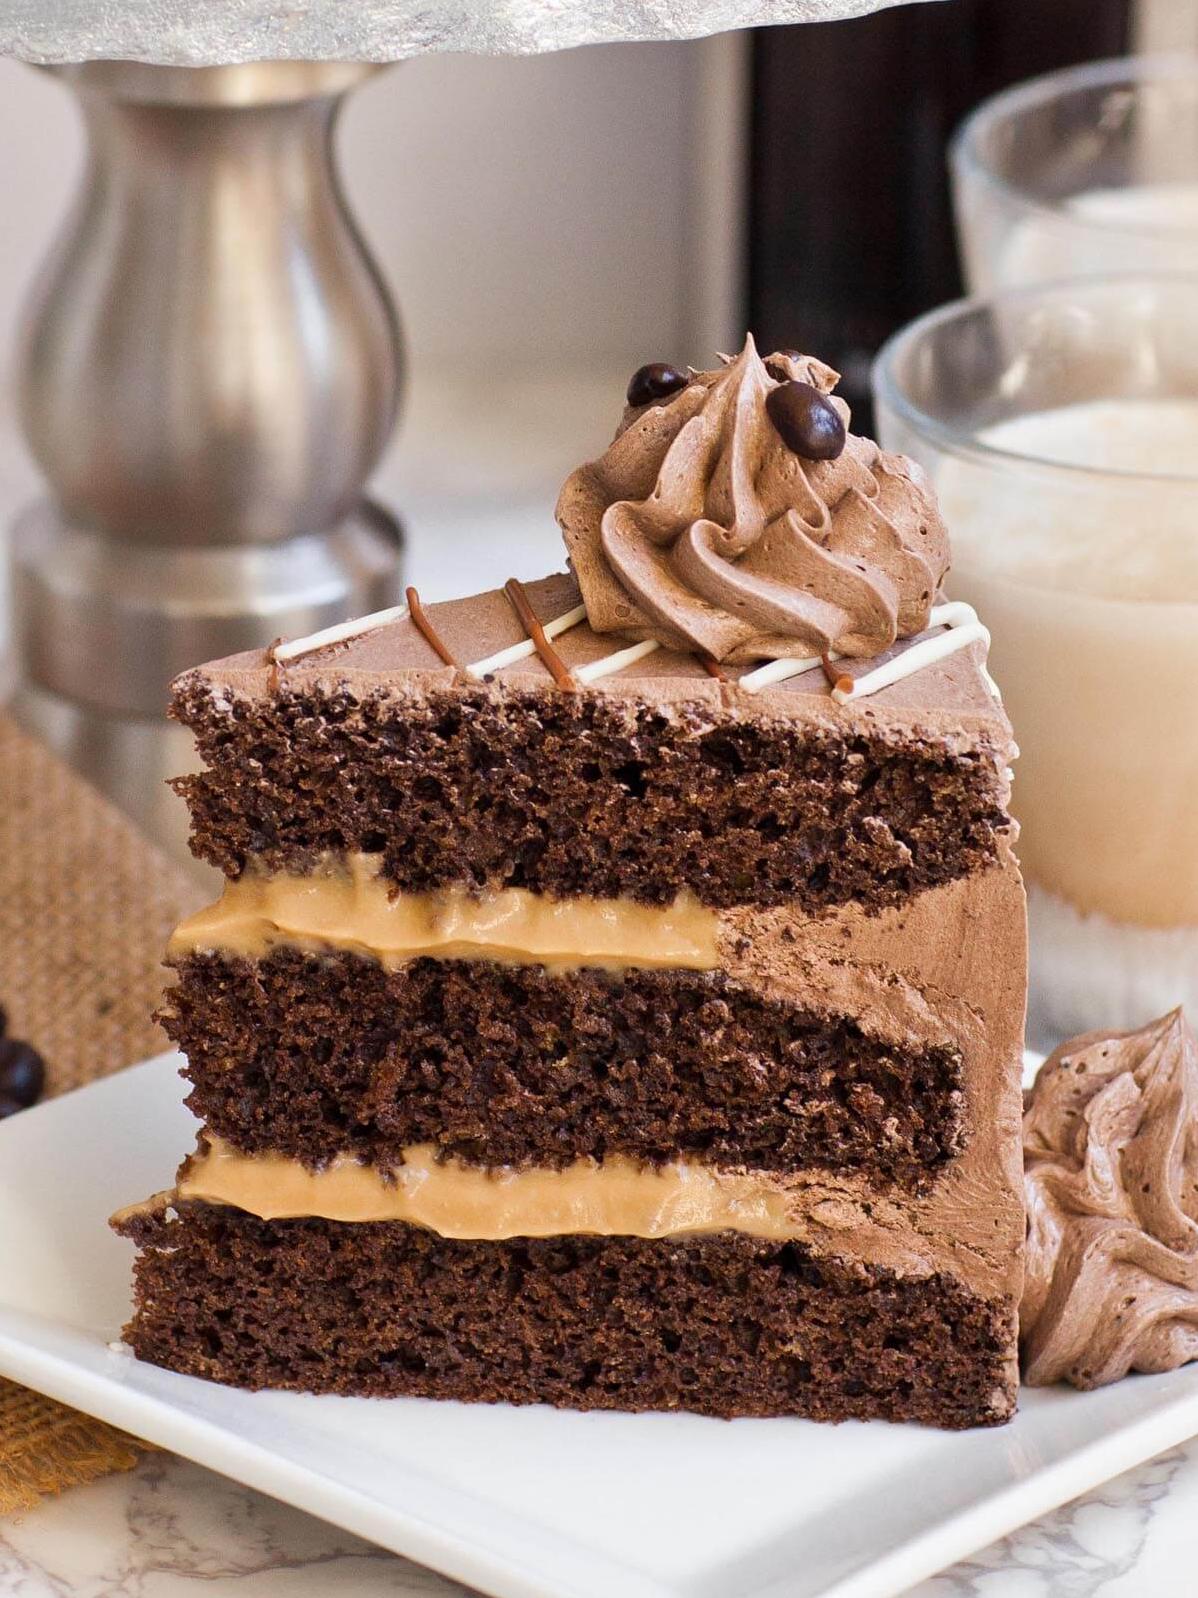  Satisfy your sweet tooth cravings with this French chocolate coffee cake.